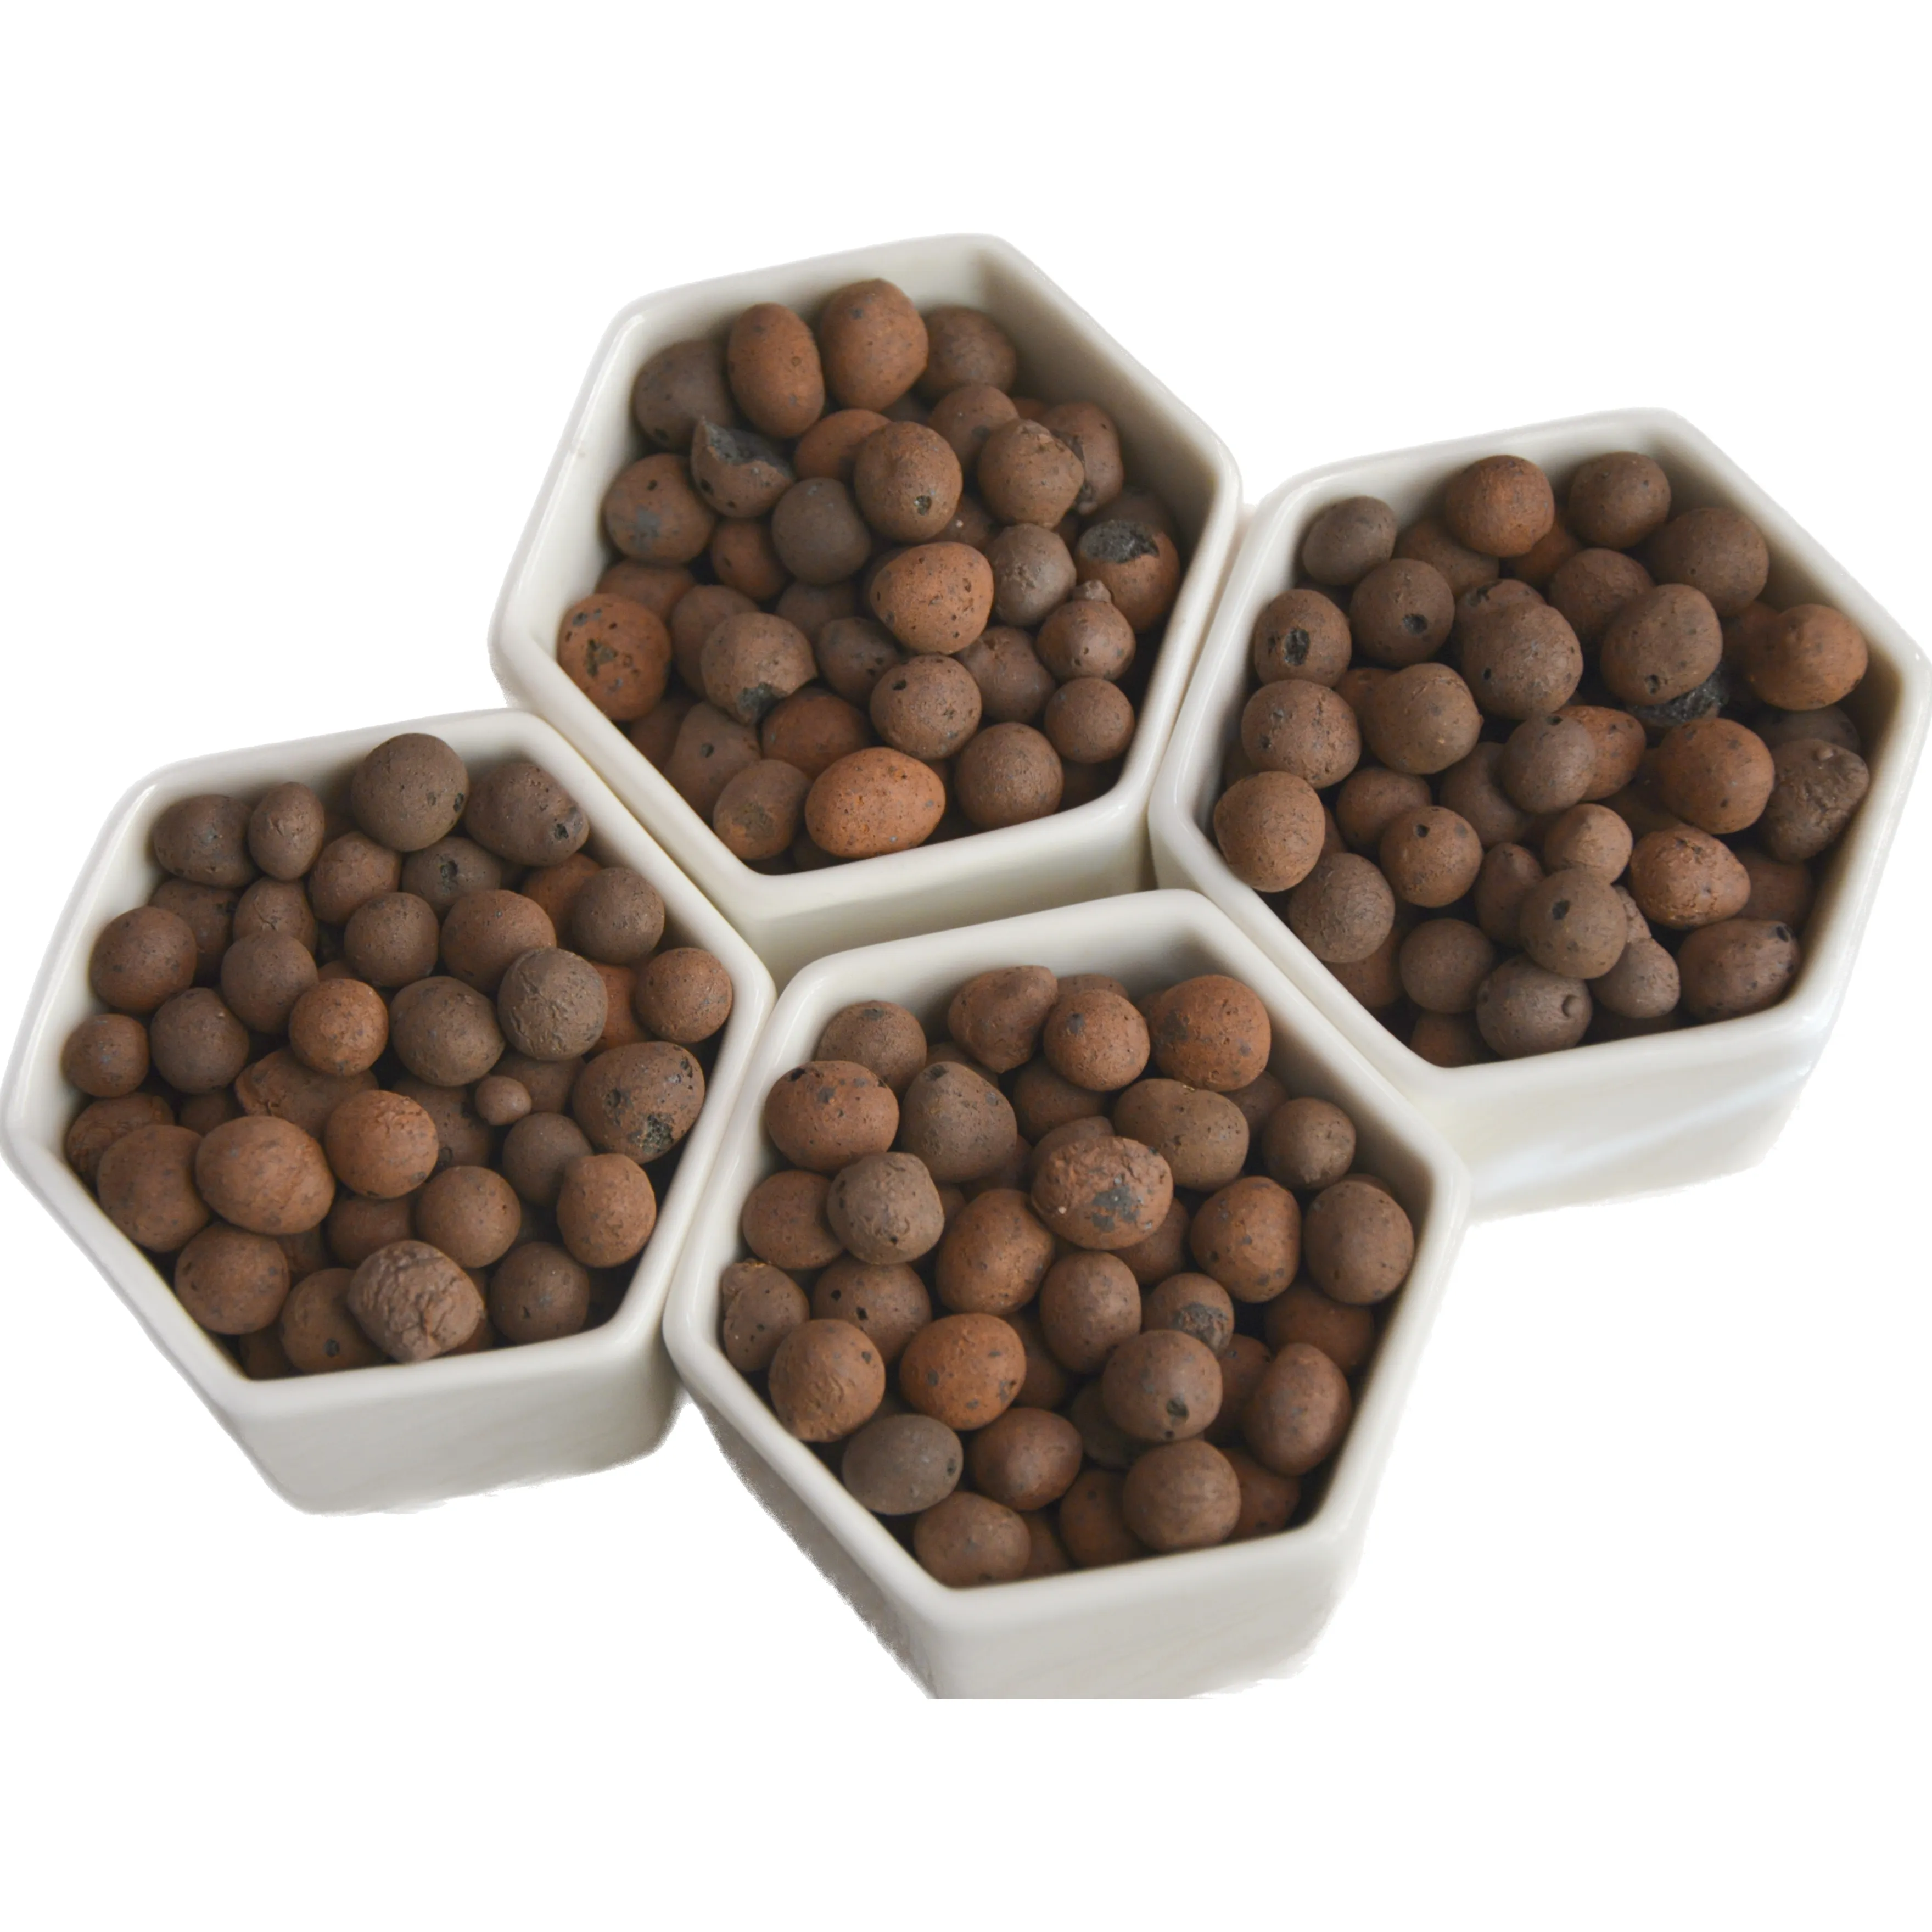 50L 8-16MM leca Lightweight Expanded Clay Aggregate for hydroponics and aeroponic systems